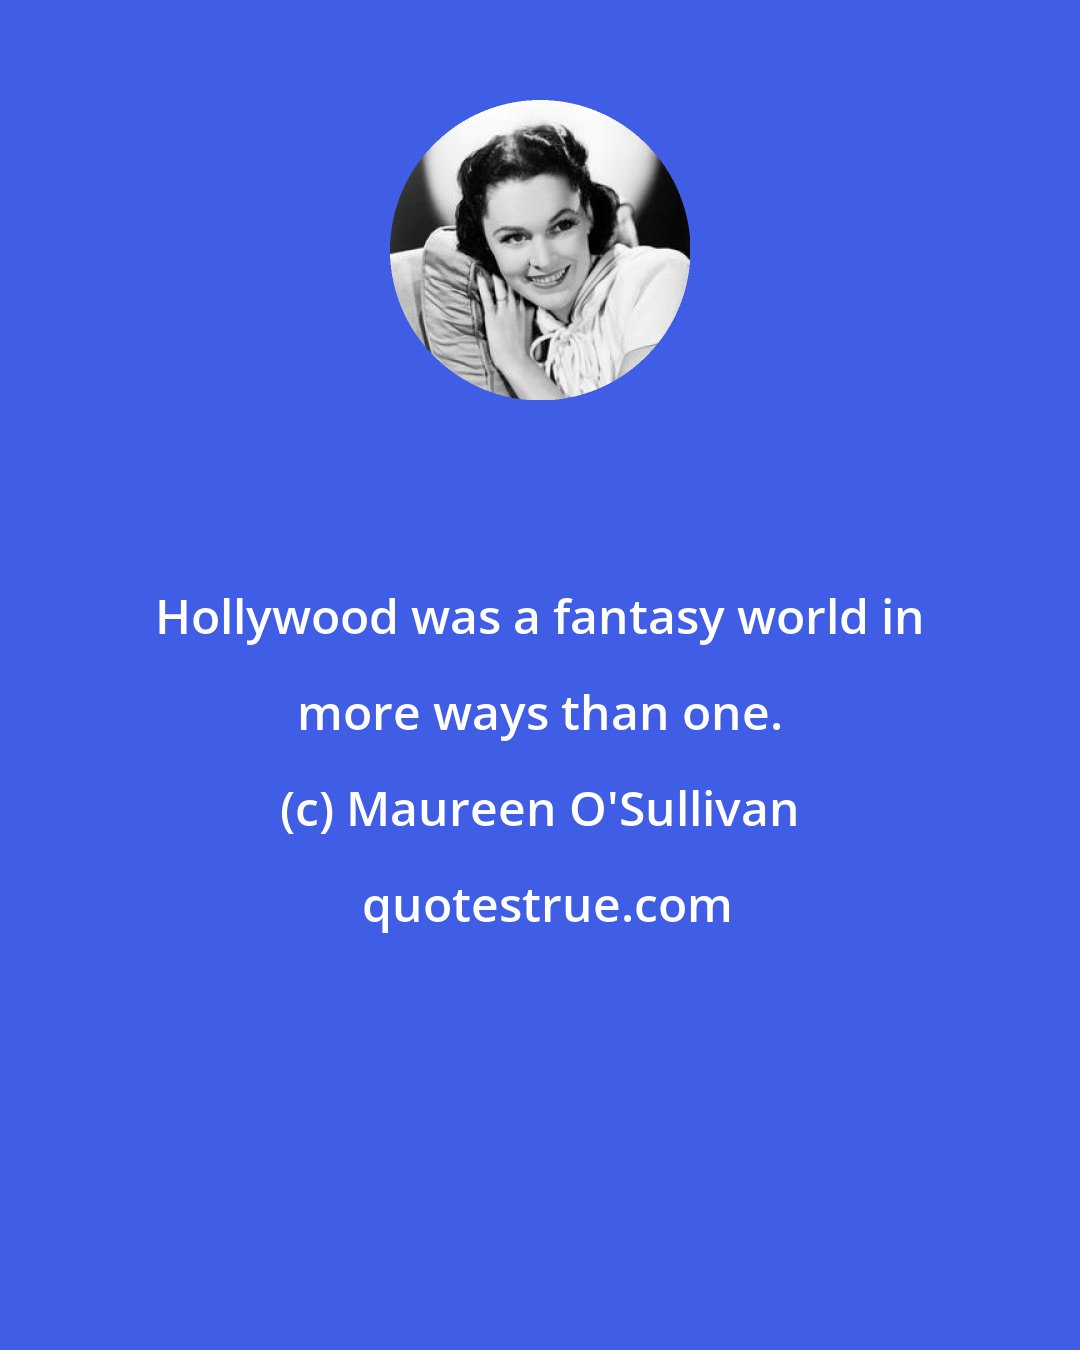 Maureen O'Sullivan: Hollywood was a fantasy world in more ways than one.